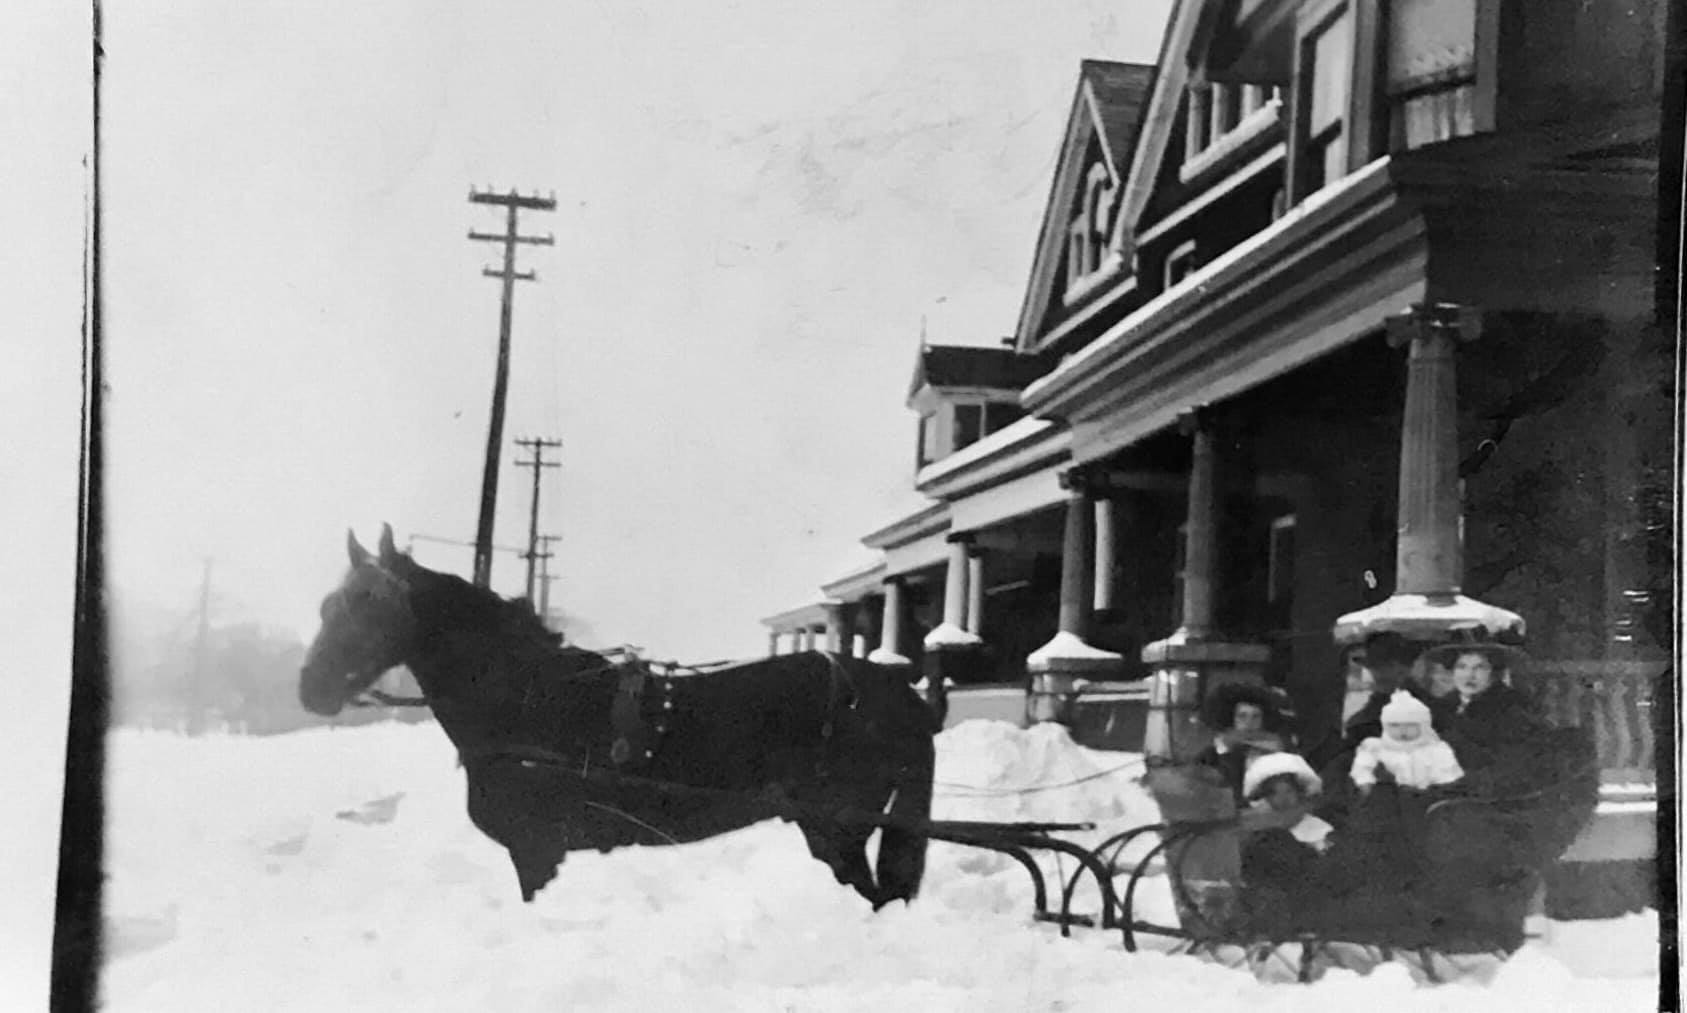 horse and buggy in front of a house in winter, early 1900s.